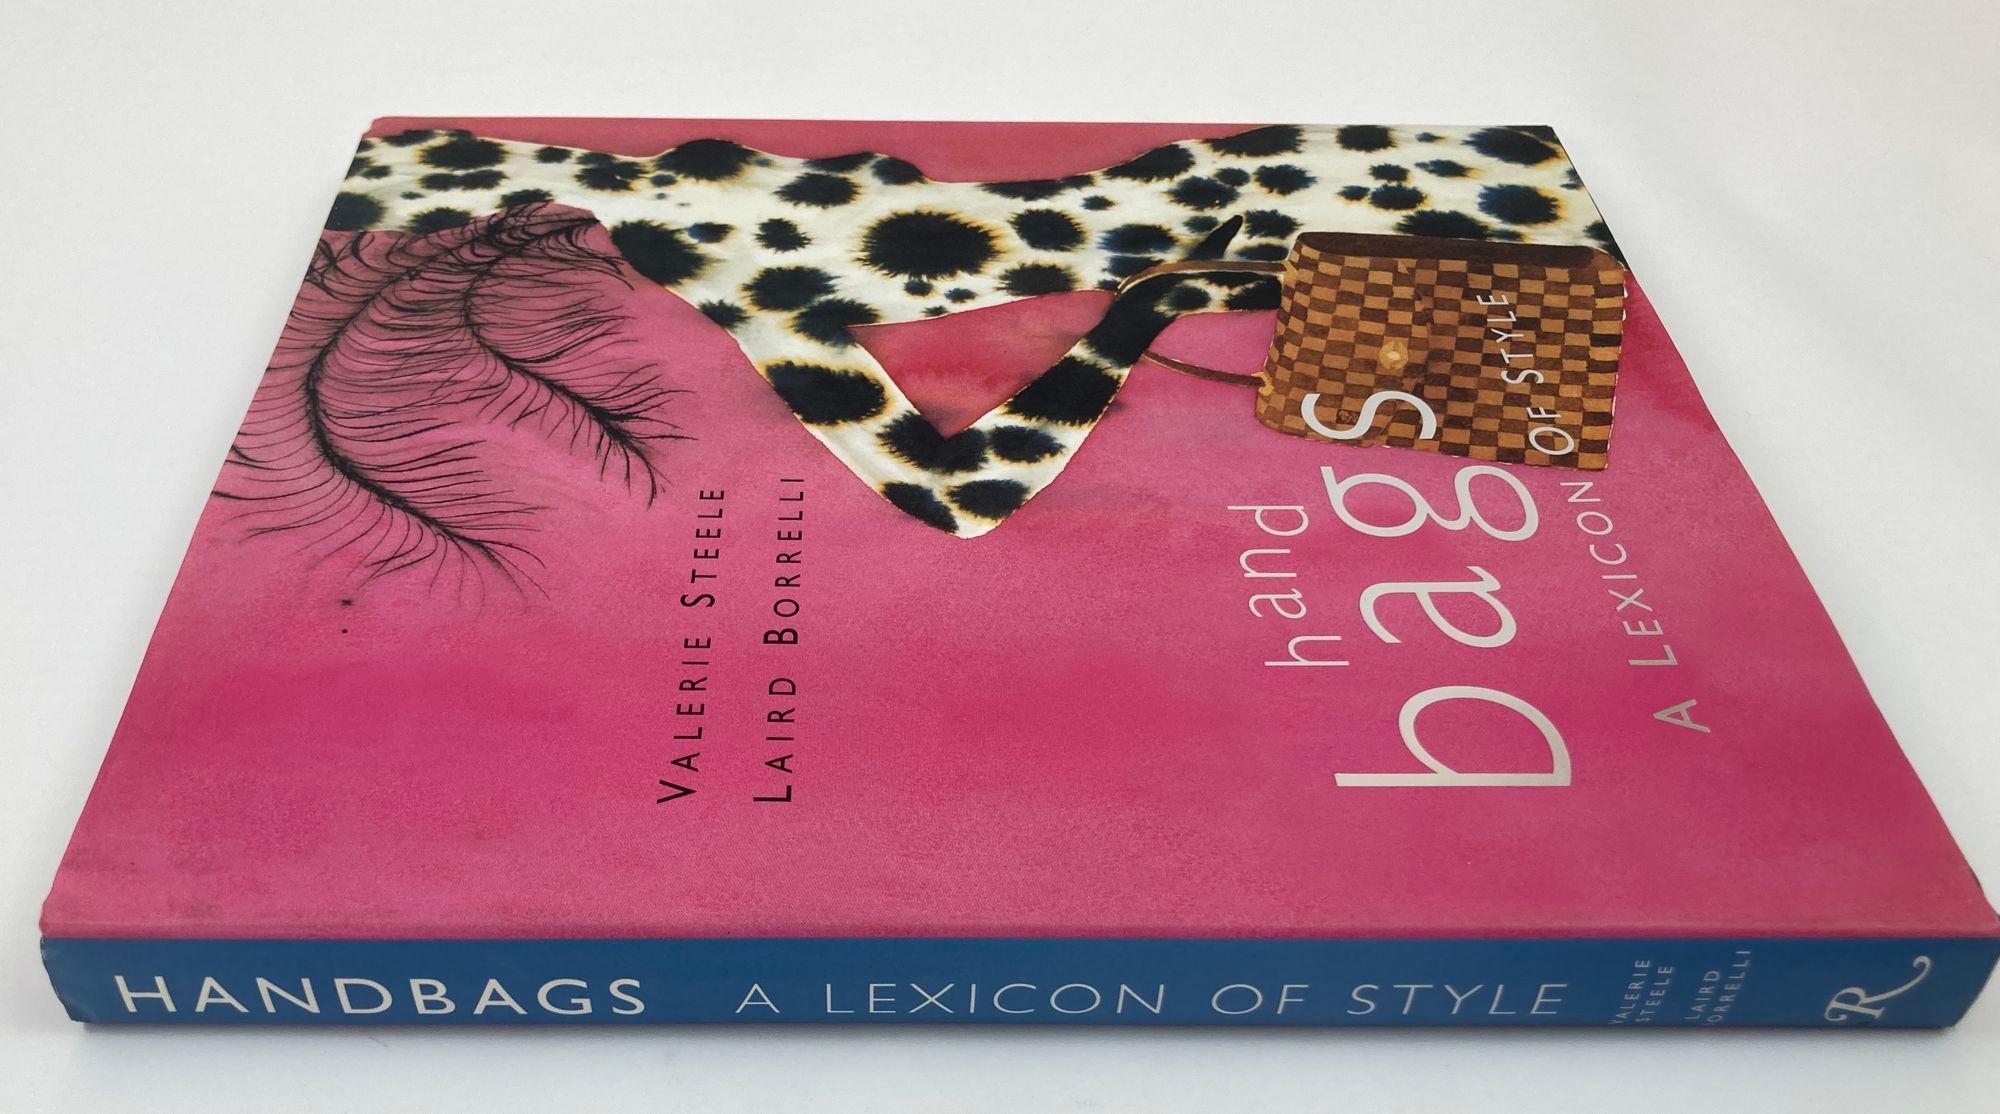 Modern Bags : A Lexicon of Style Valerie Steele, Laird Borrelli Hardcover Book 1st Ed. For Sale